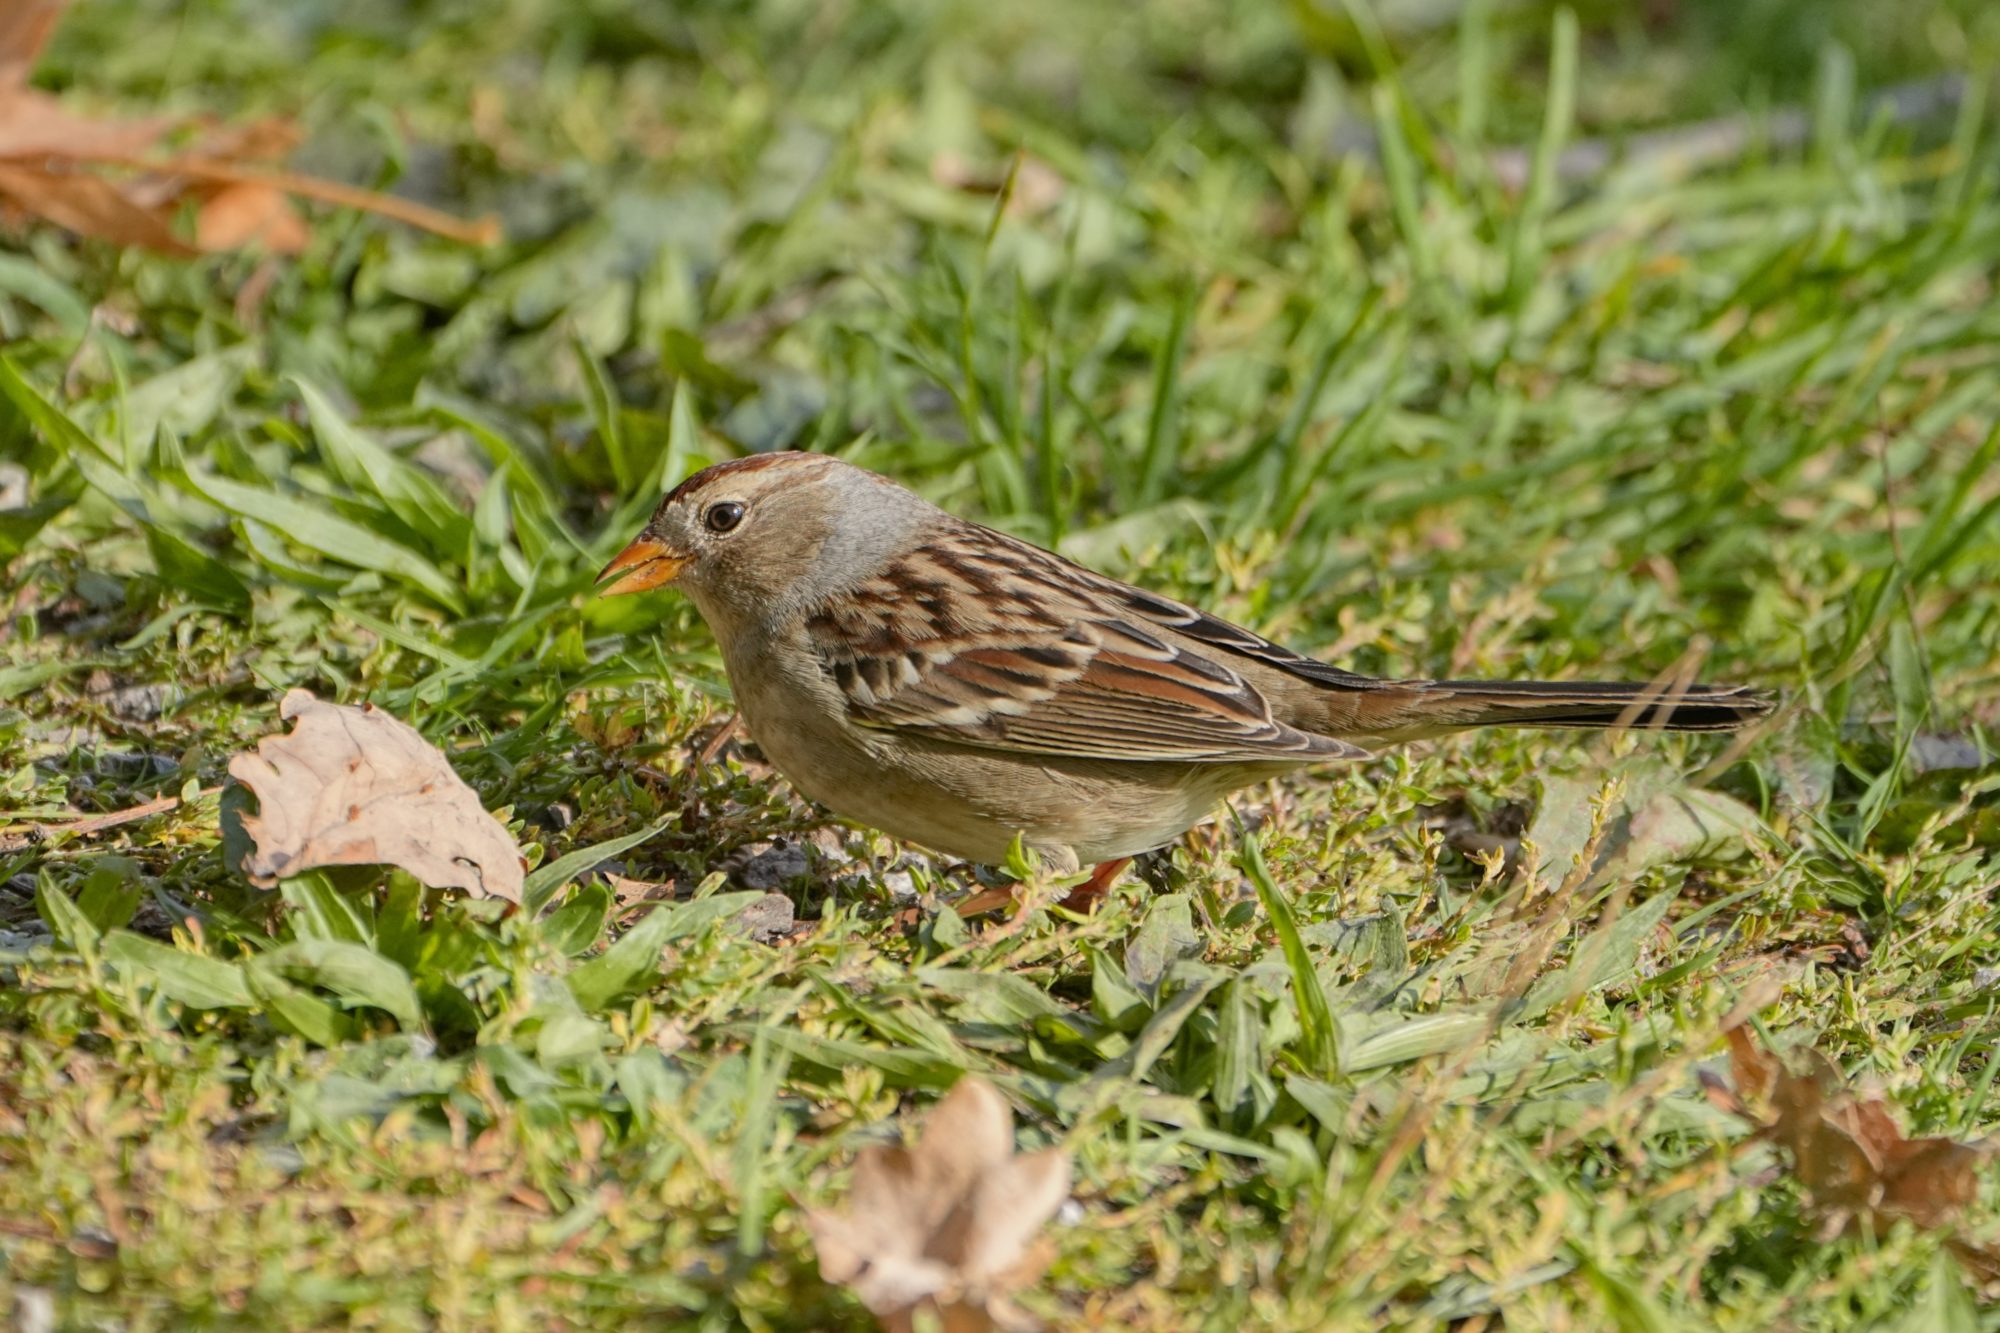 A juvenile White-throated Sparrow, probably; it has brown stripes on the top of its head, and an overall brown body with marbled wings. It is foraging in short grass.